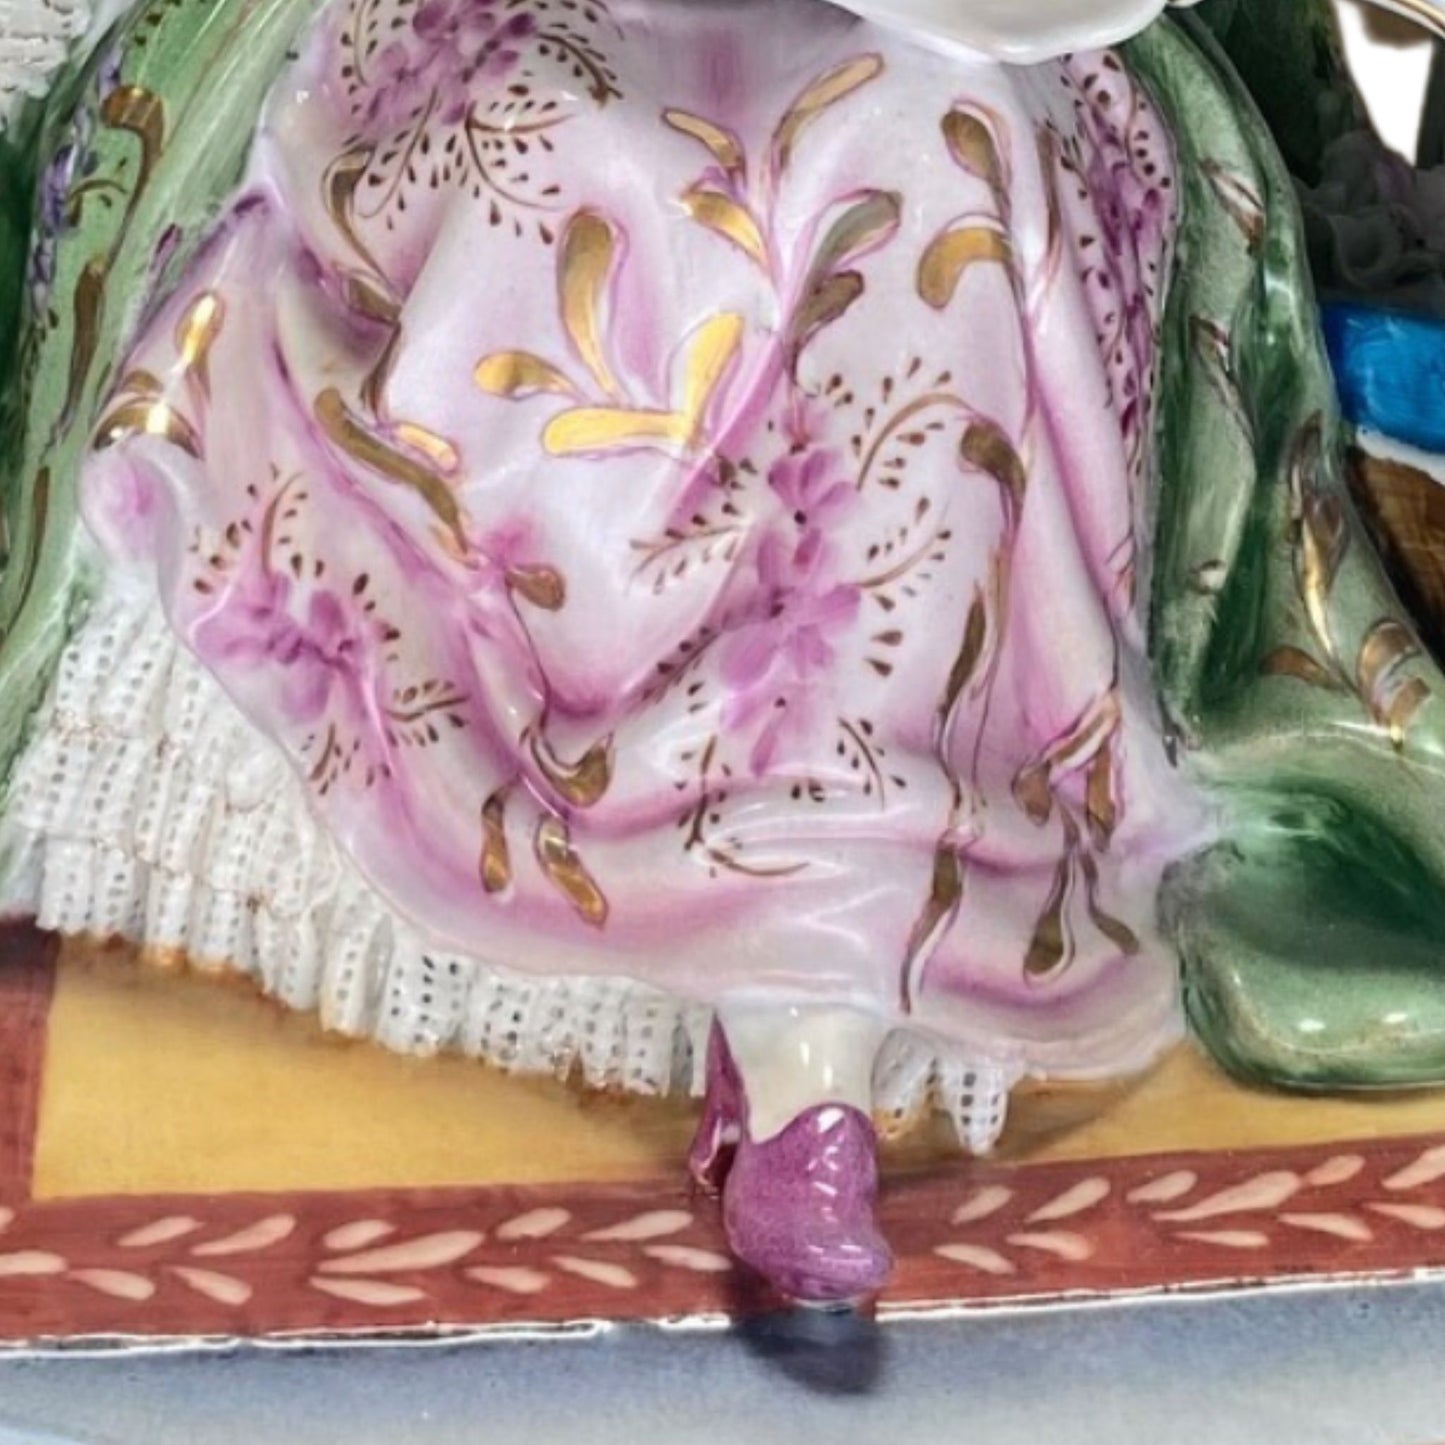 Hand-painted Net Lace Porcelain Reading Lady Figurine